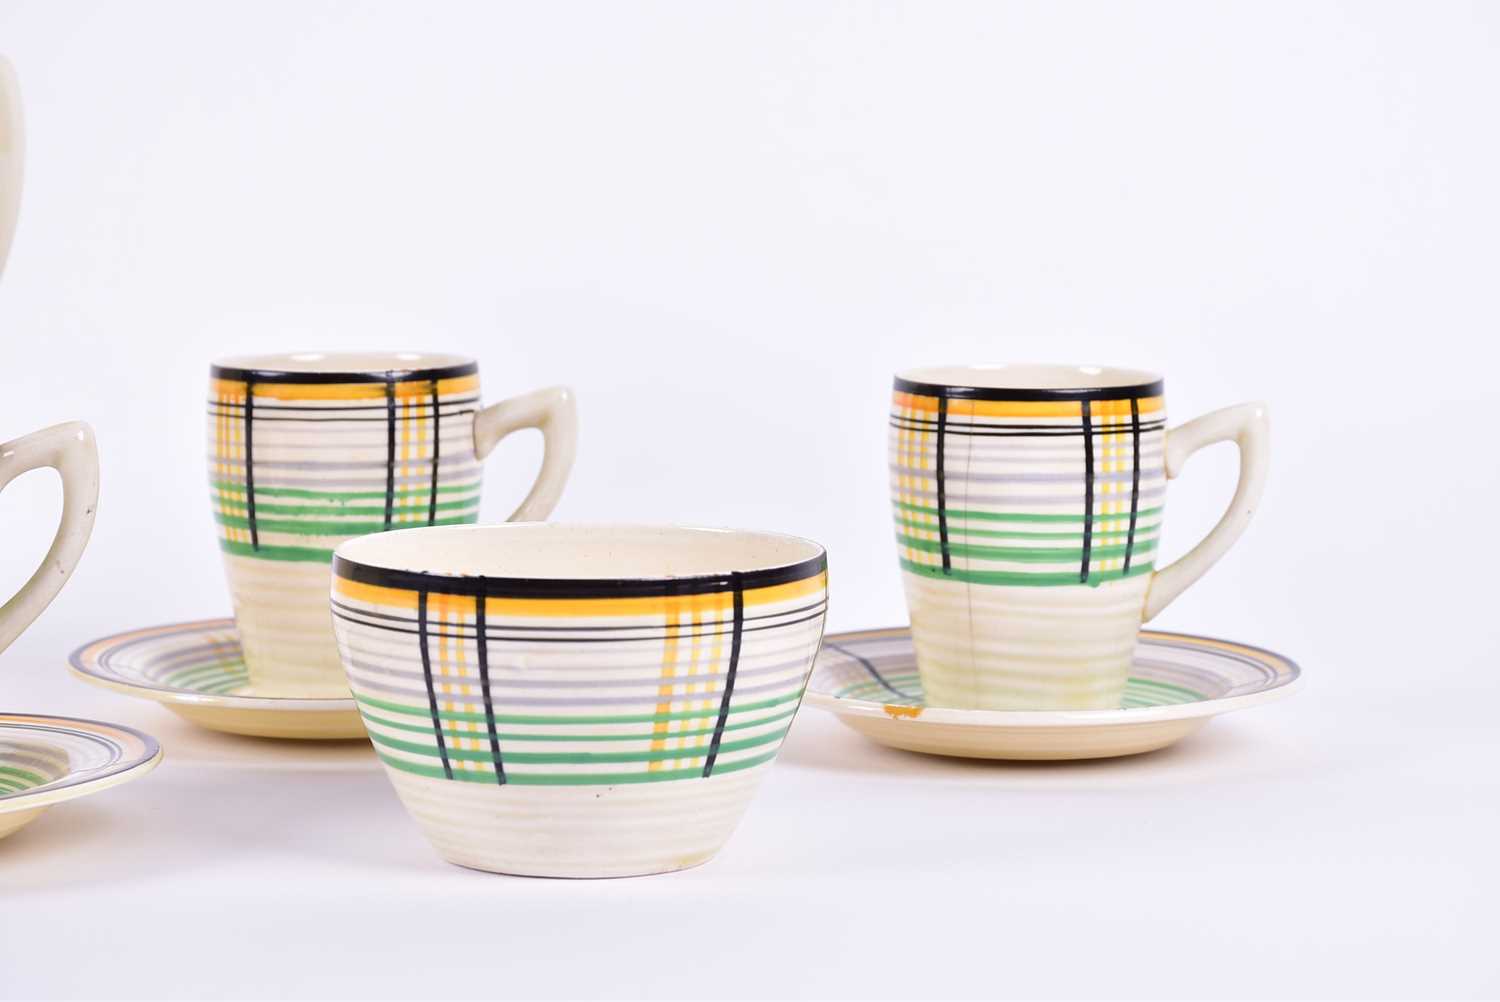 A Clarice Cliff Bizarre 1930s 'Tartan' pattern part coffee service, for Wilkinson, numbered 6517, - Image 9 of 11